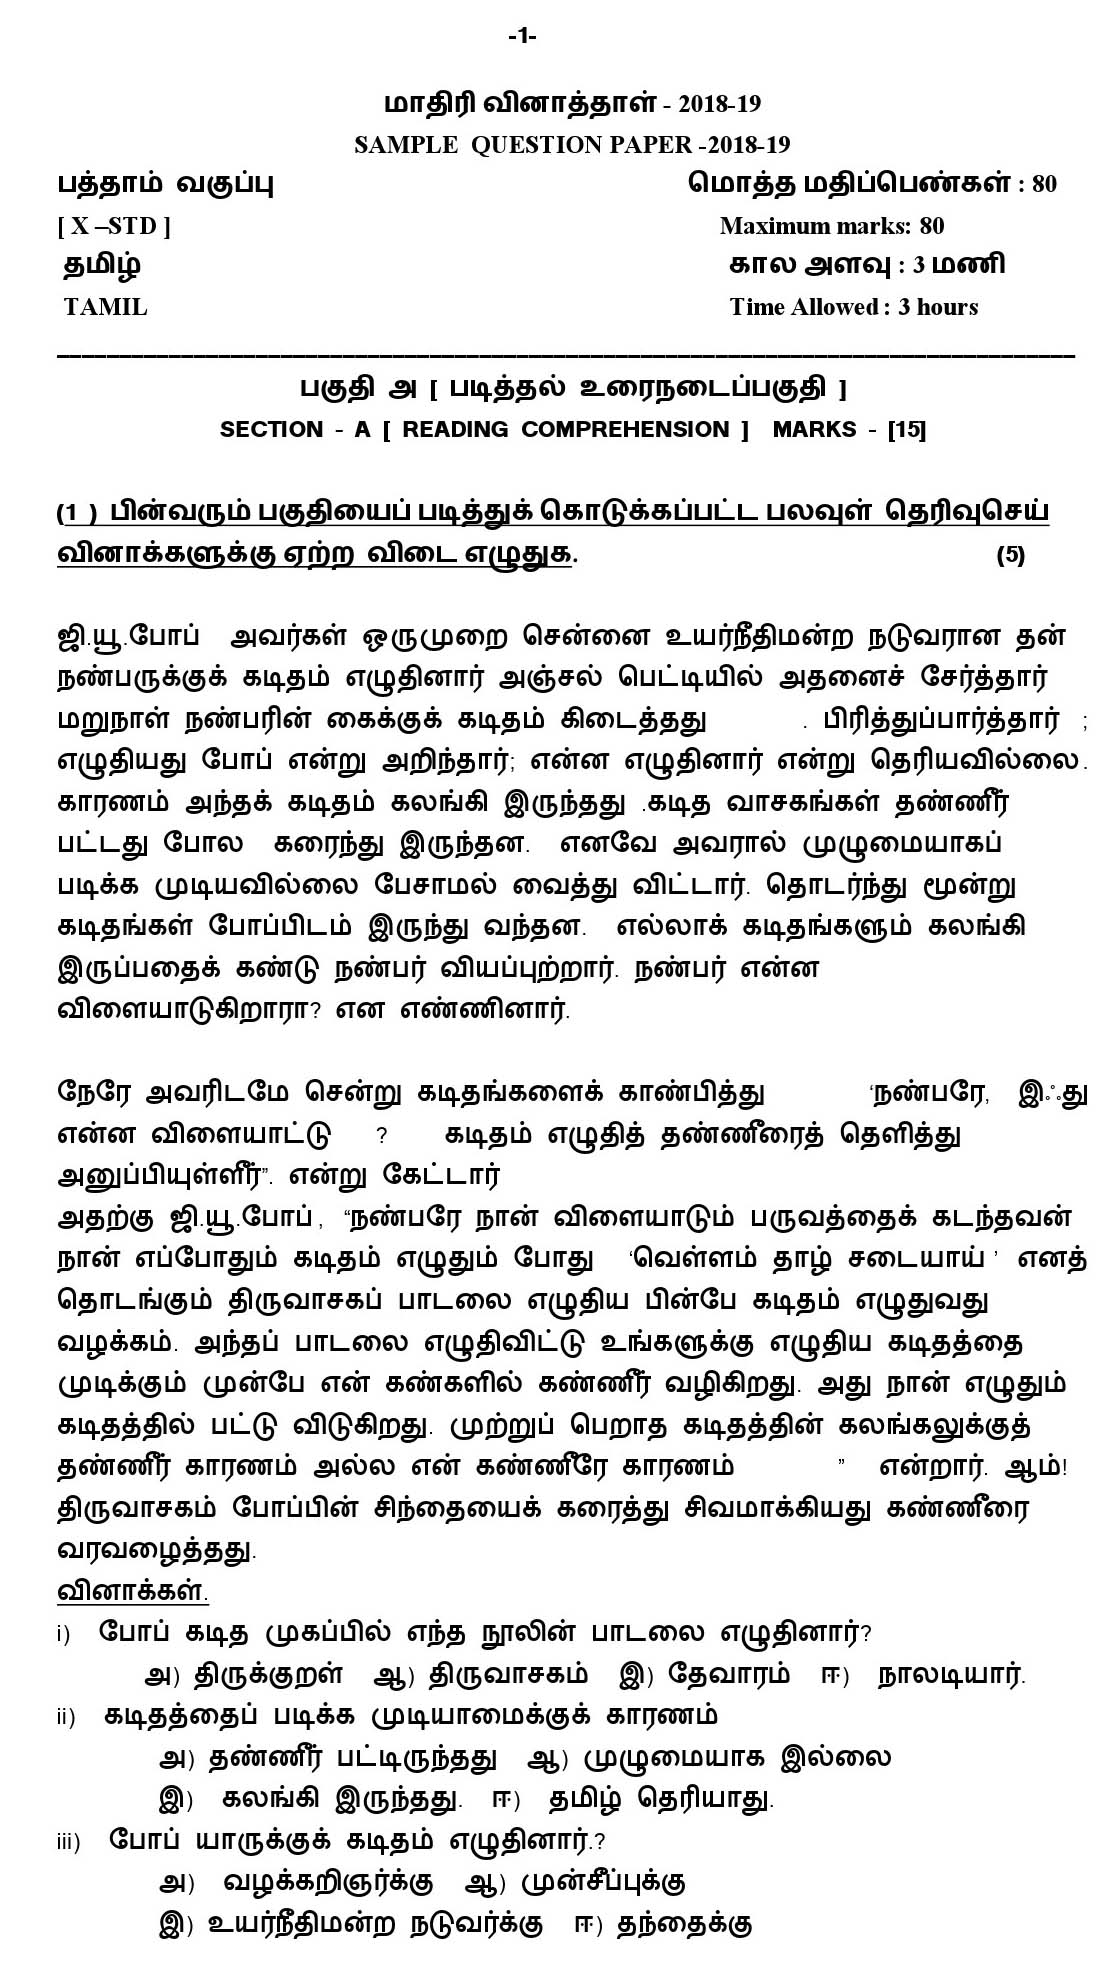 Tamil CBSE Class X Sample Question Paper 2018-19 - Image 1